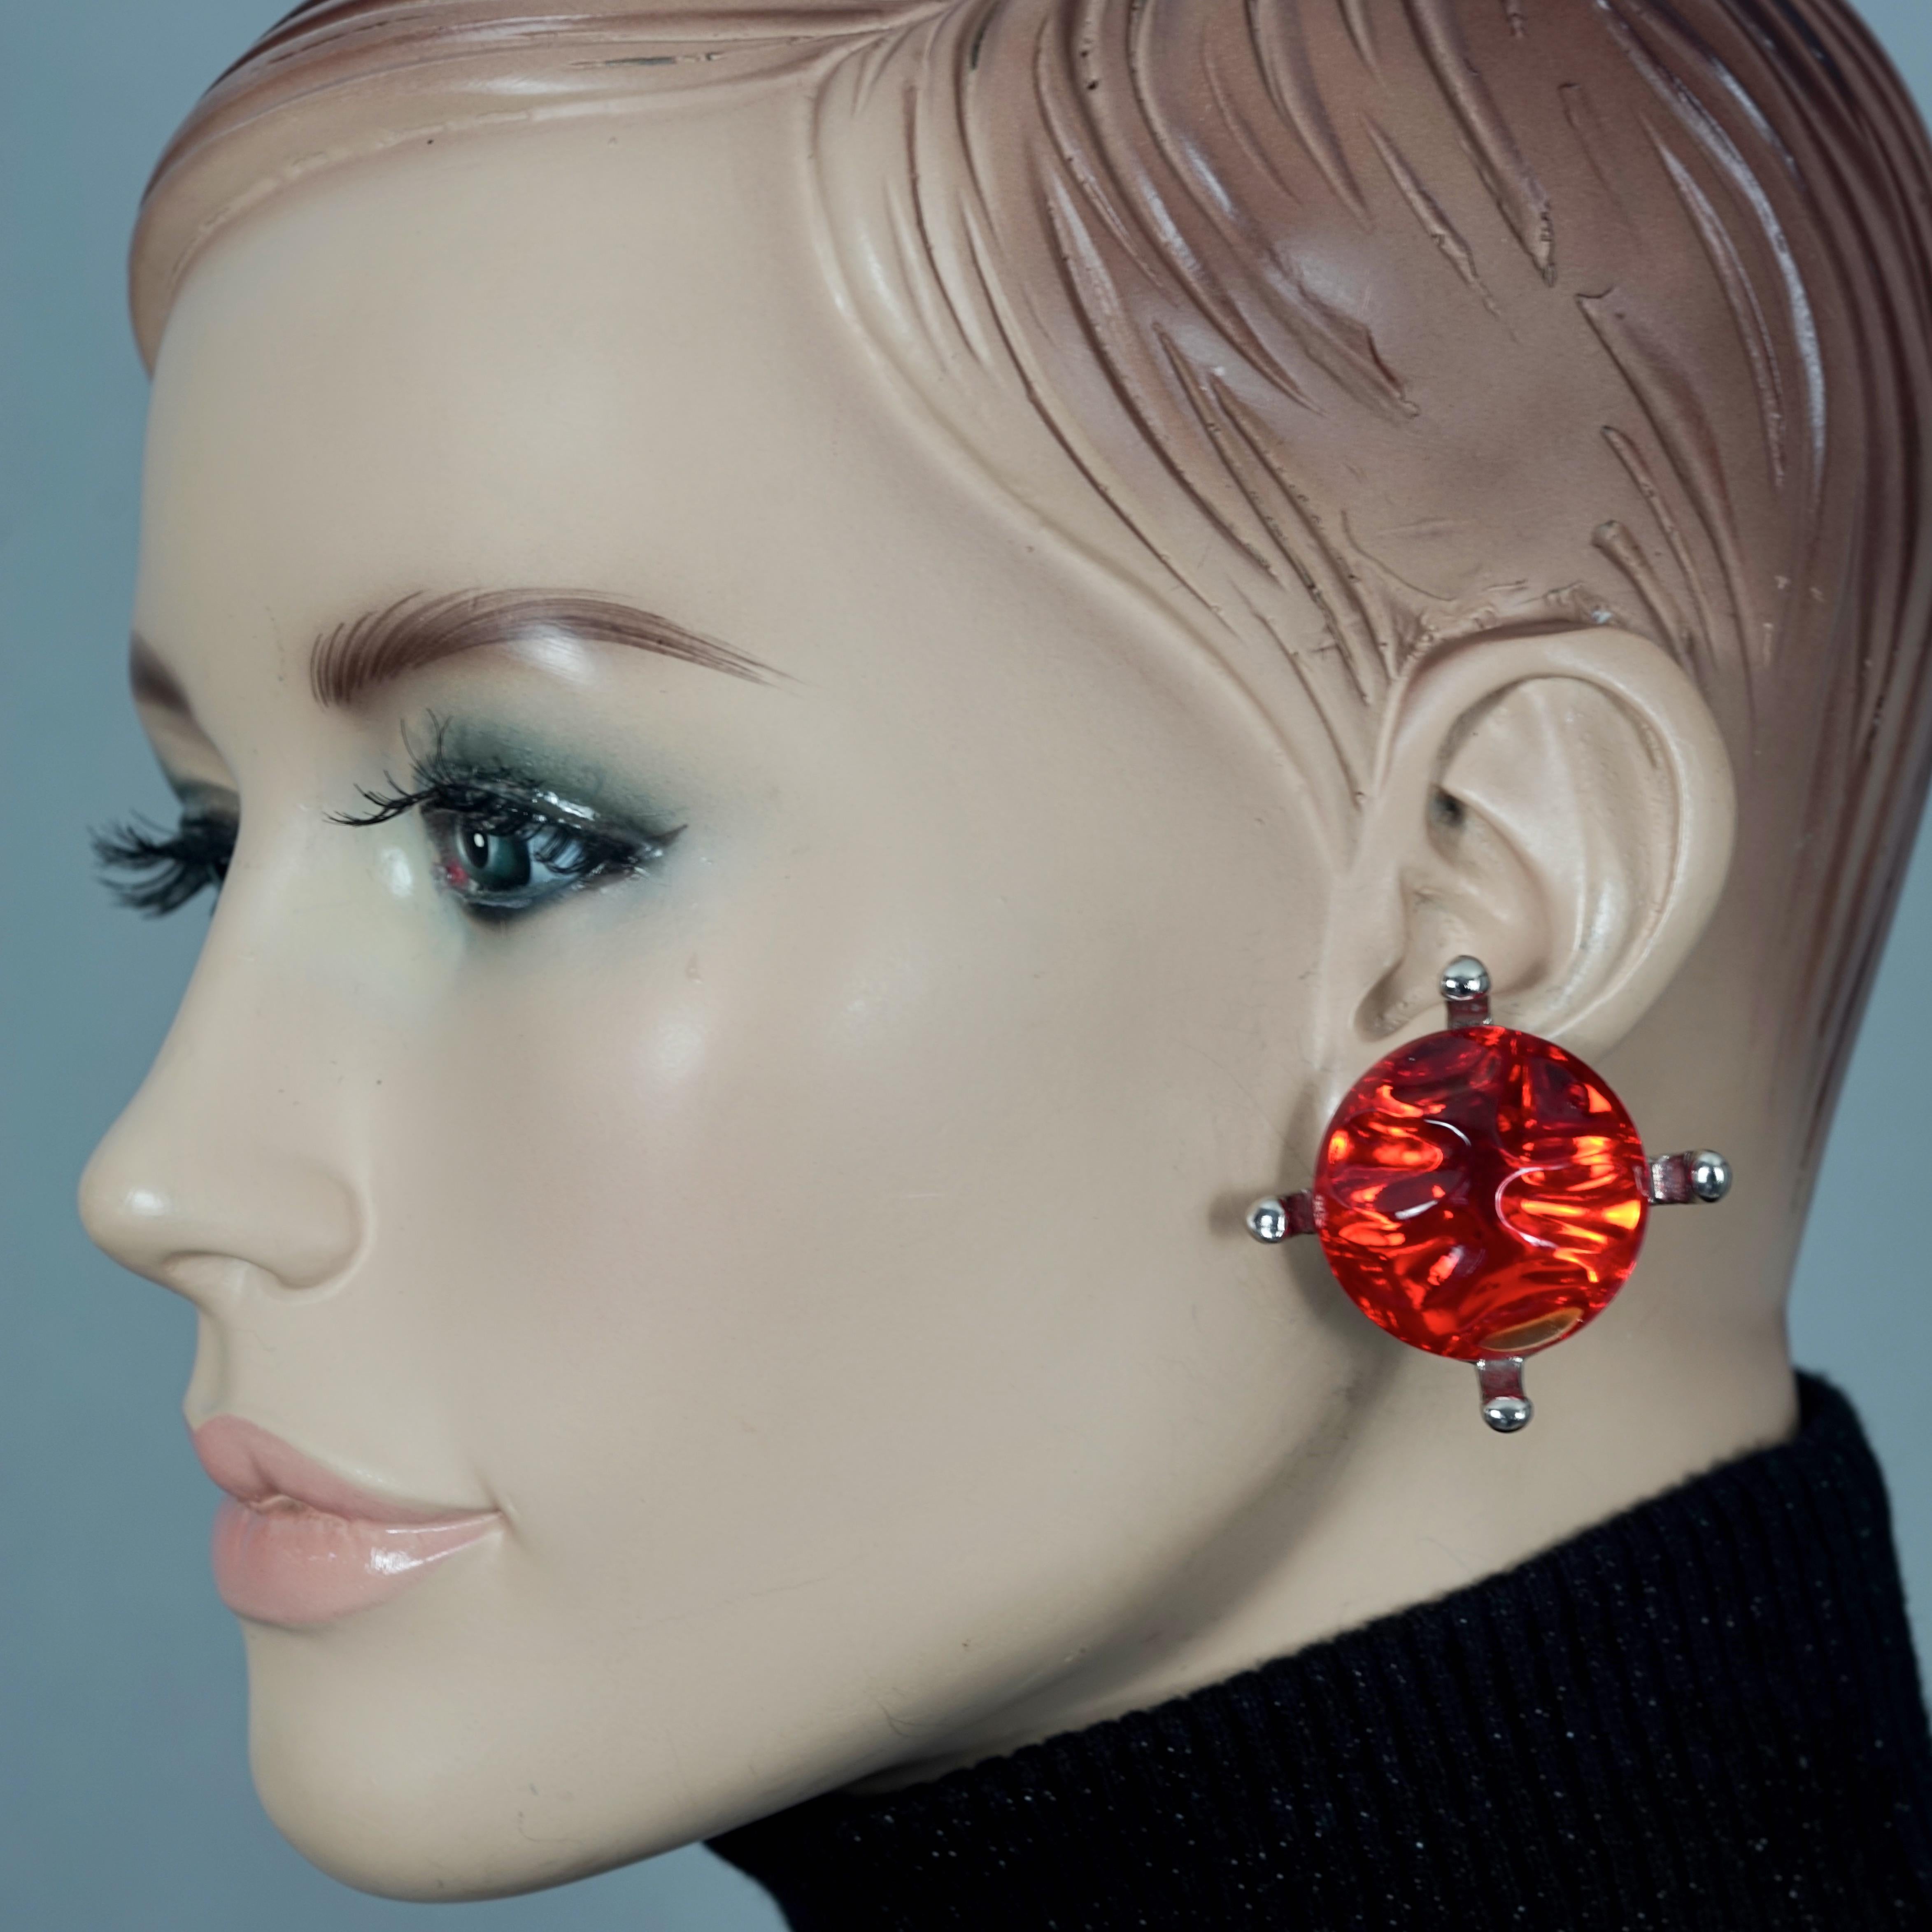 Vintage YVES SAINT LAURENT Ysl Irregular Red Glass Cabochon Earrings

Measurements:
Height: 1.69 inches (4.3 cm)
Width: 1.69 inches (4.3 cm)
Weight per Earring: 23 grams

Features:
- 100% Authentic YVES SAINT LAURENT.
- Irregular red glass